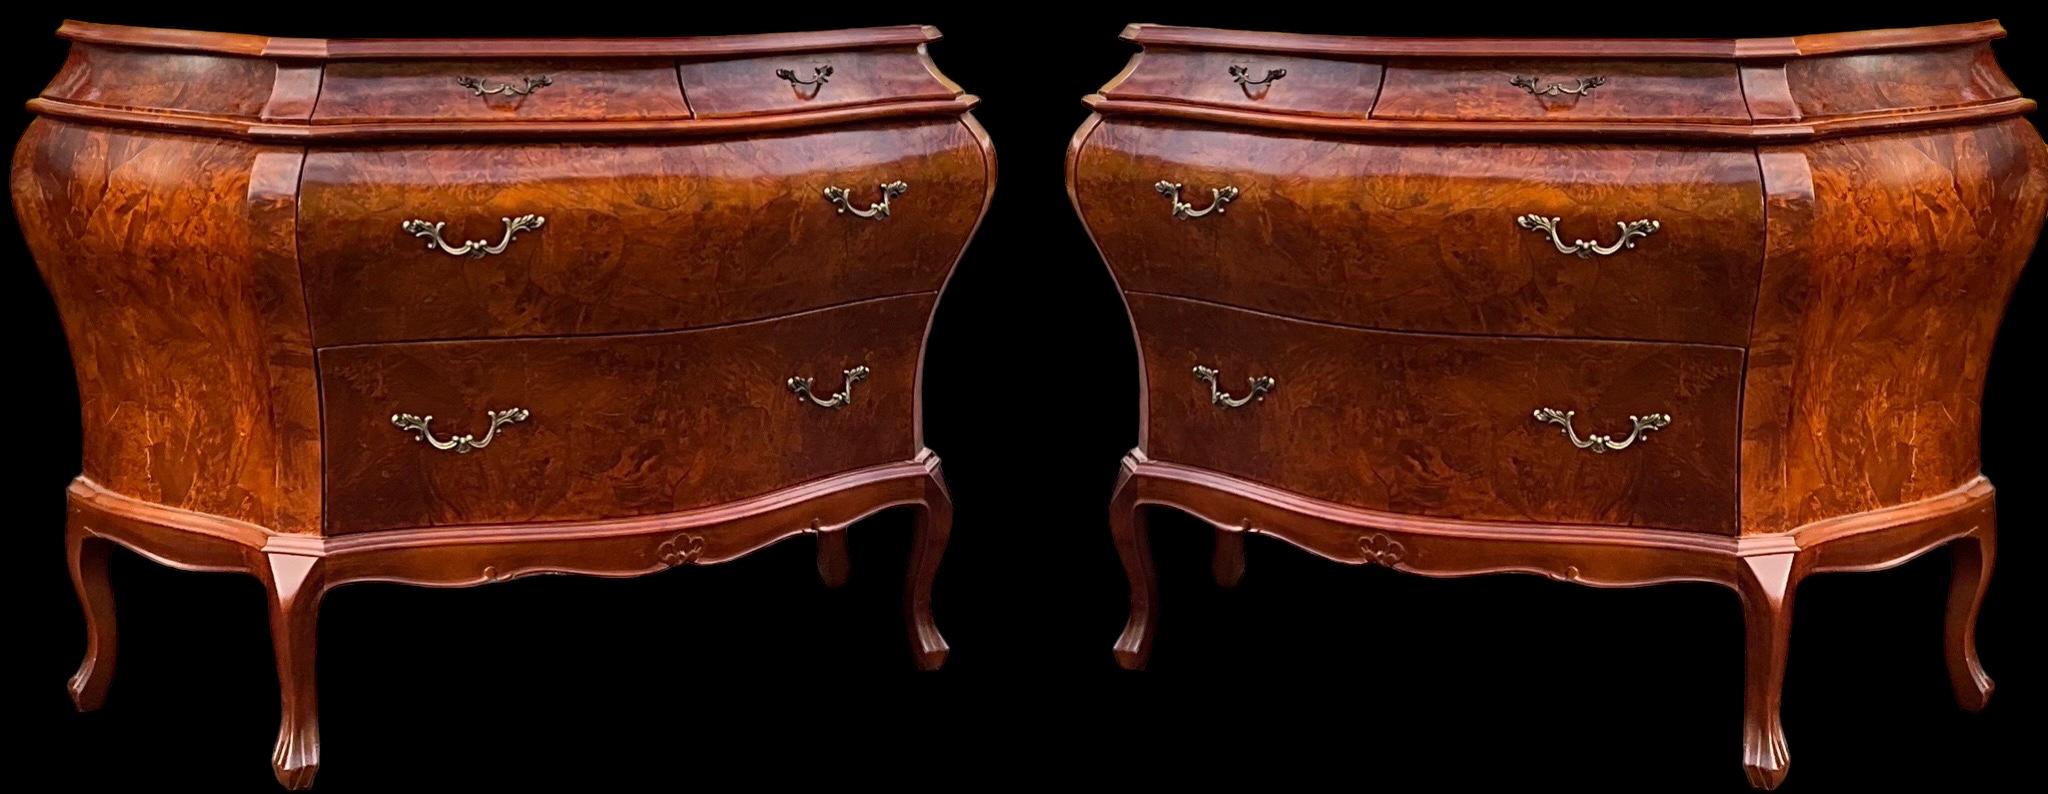 1970s French Style Italian Burlwood And Brass Commodes / Chest Of Drawers - Pair For Sale 7